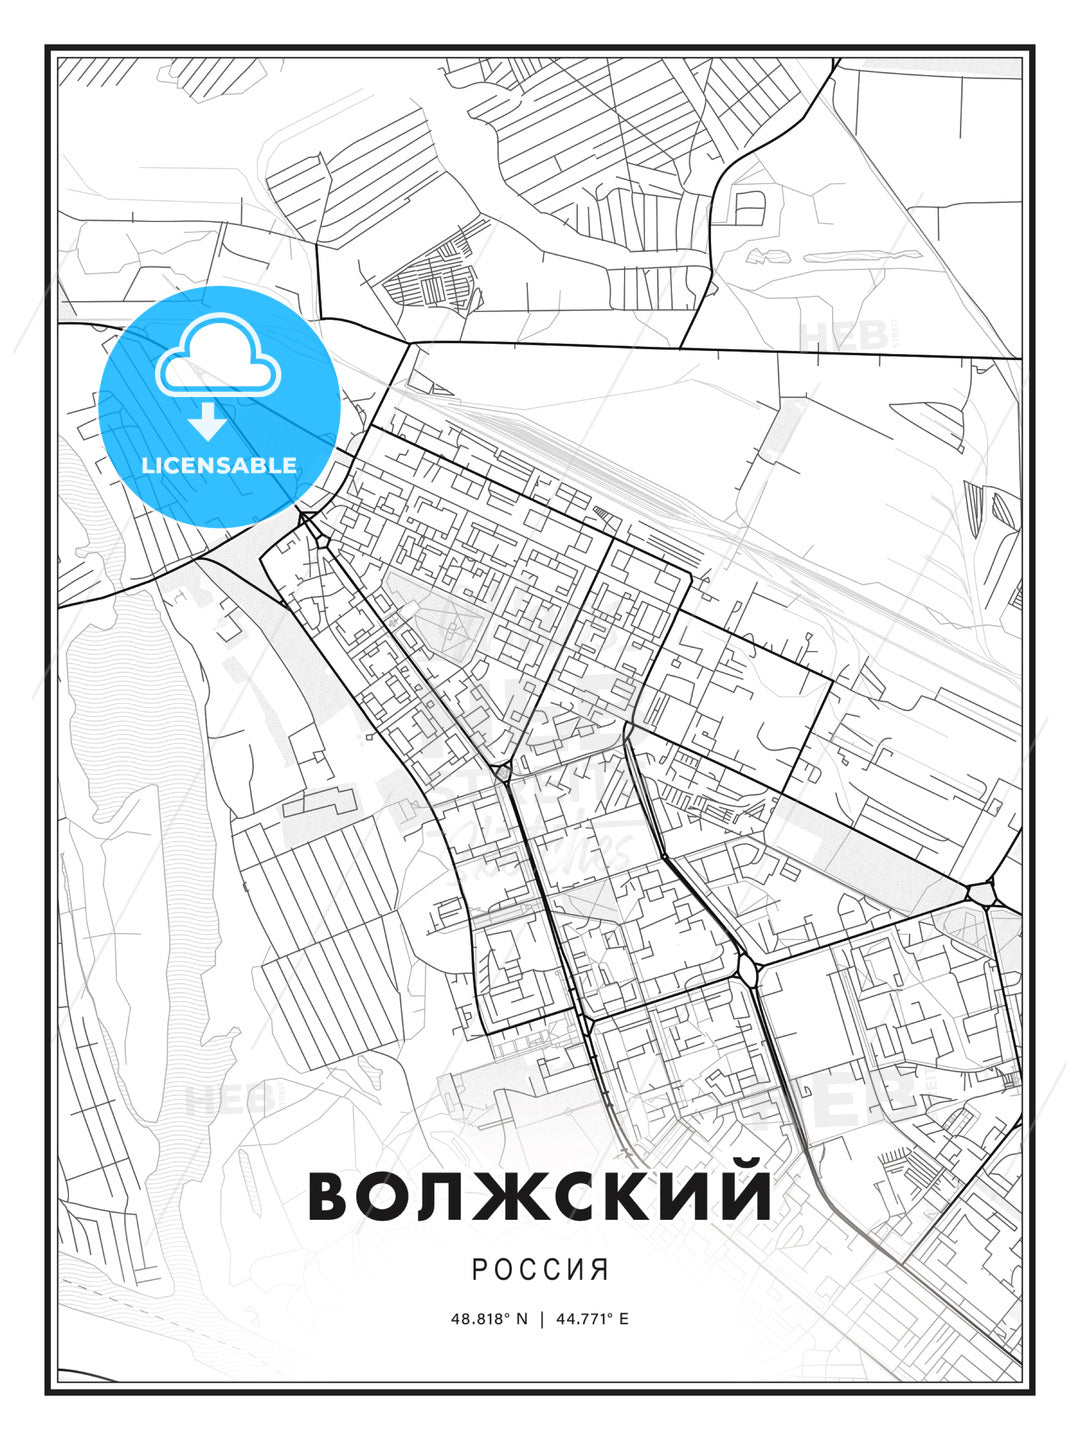 ВОЛЖСКИЙ / Volzhsky, Russia, Modern Print Template in Various Formats - HEBSTREITS Sketches